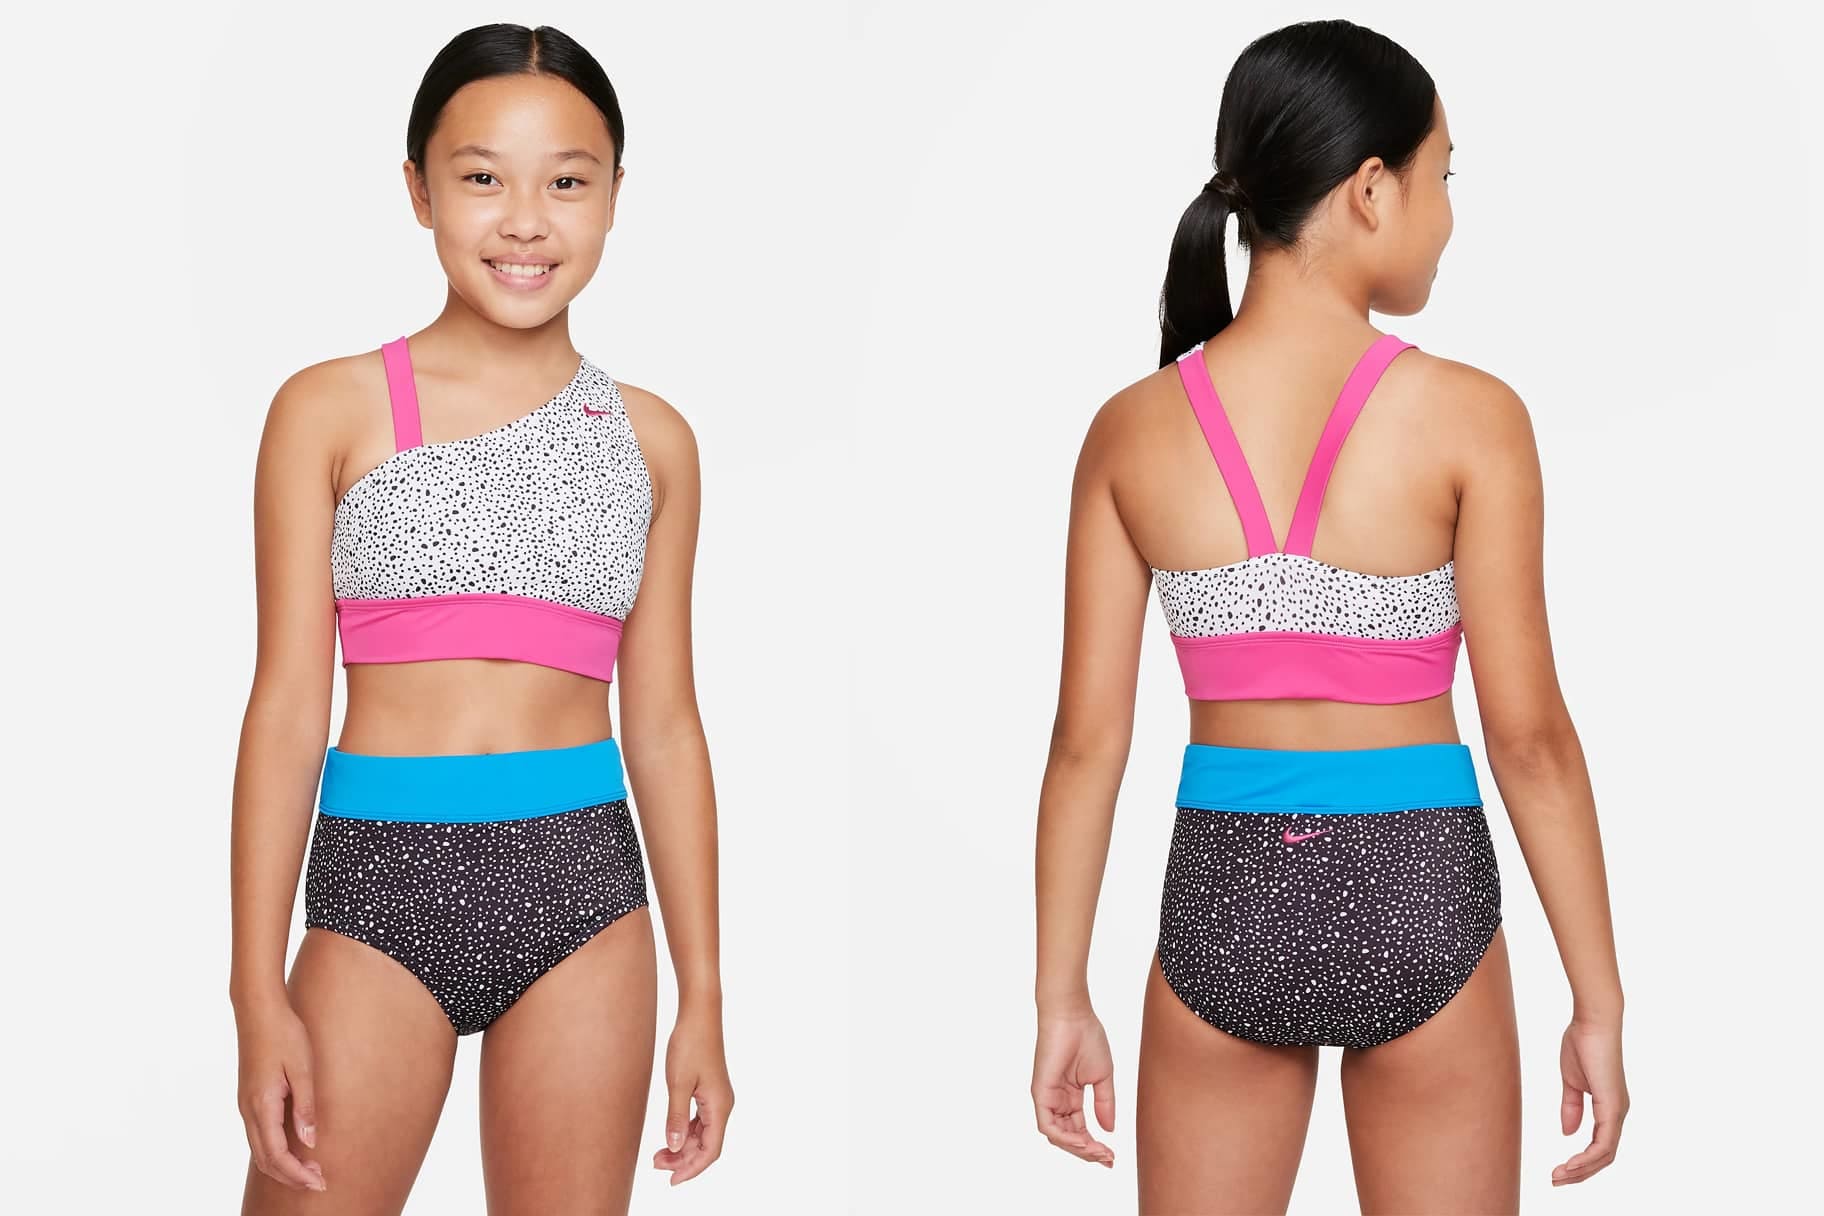 The Best Nike Swimsuits for Nike.com